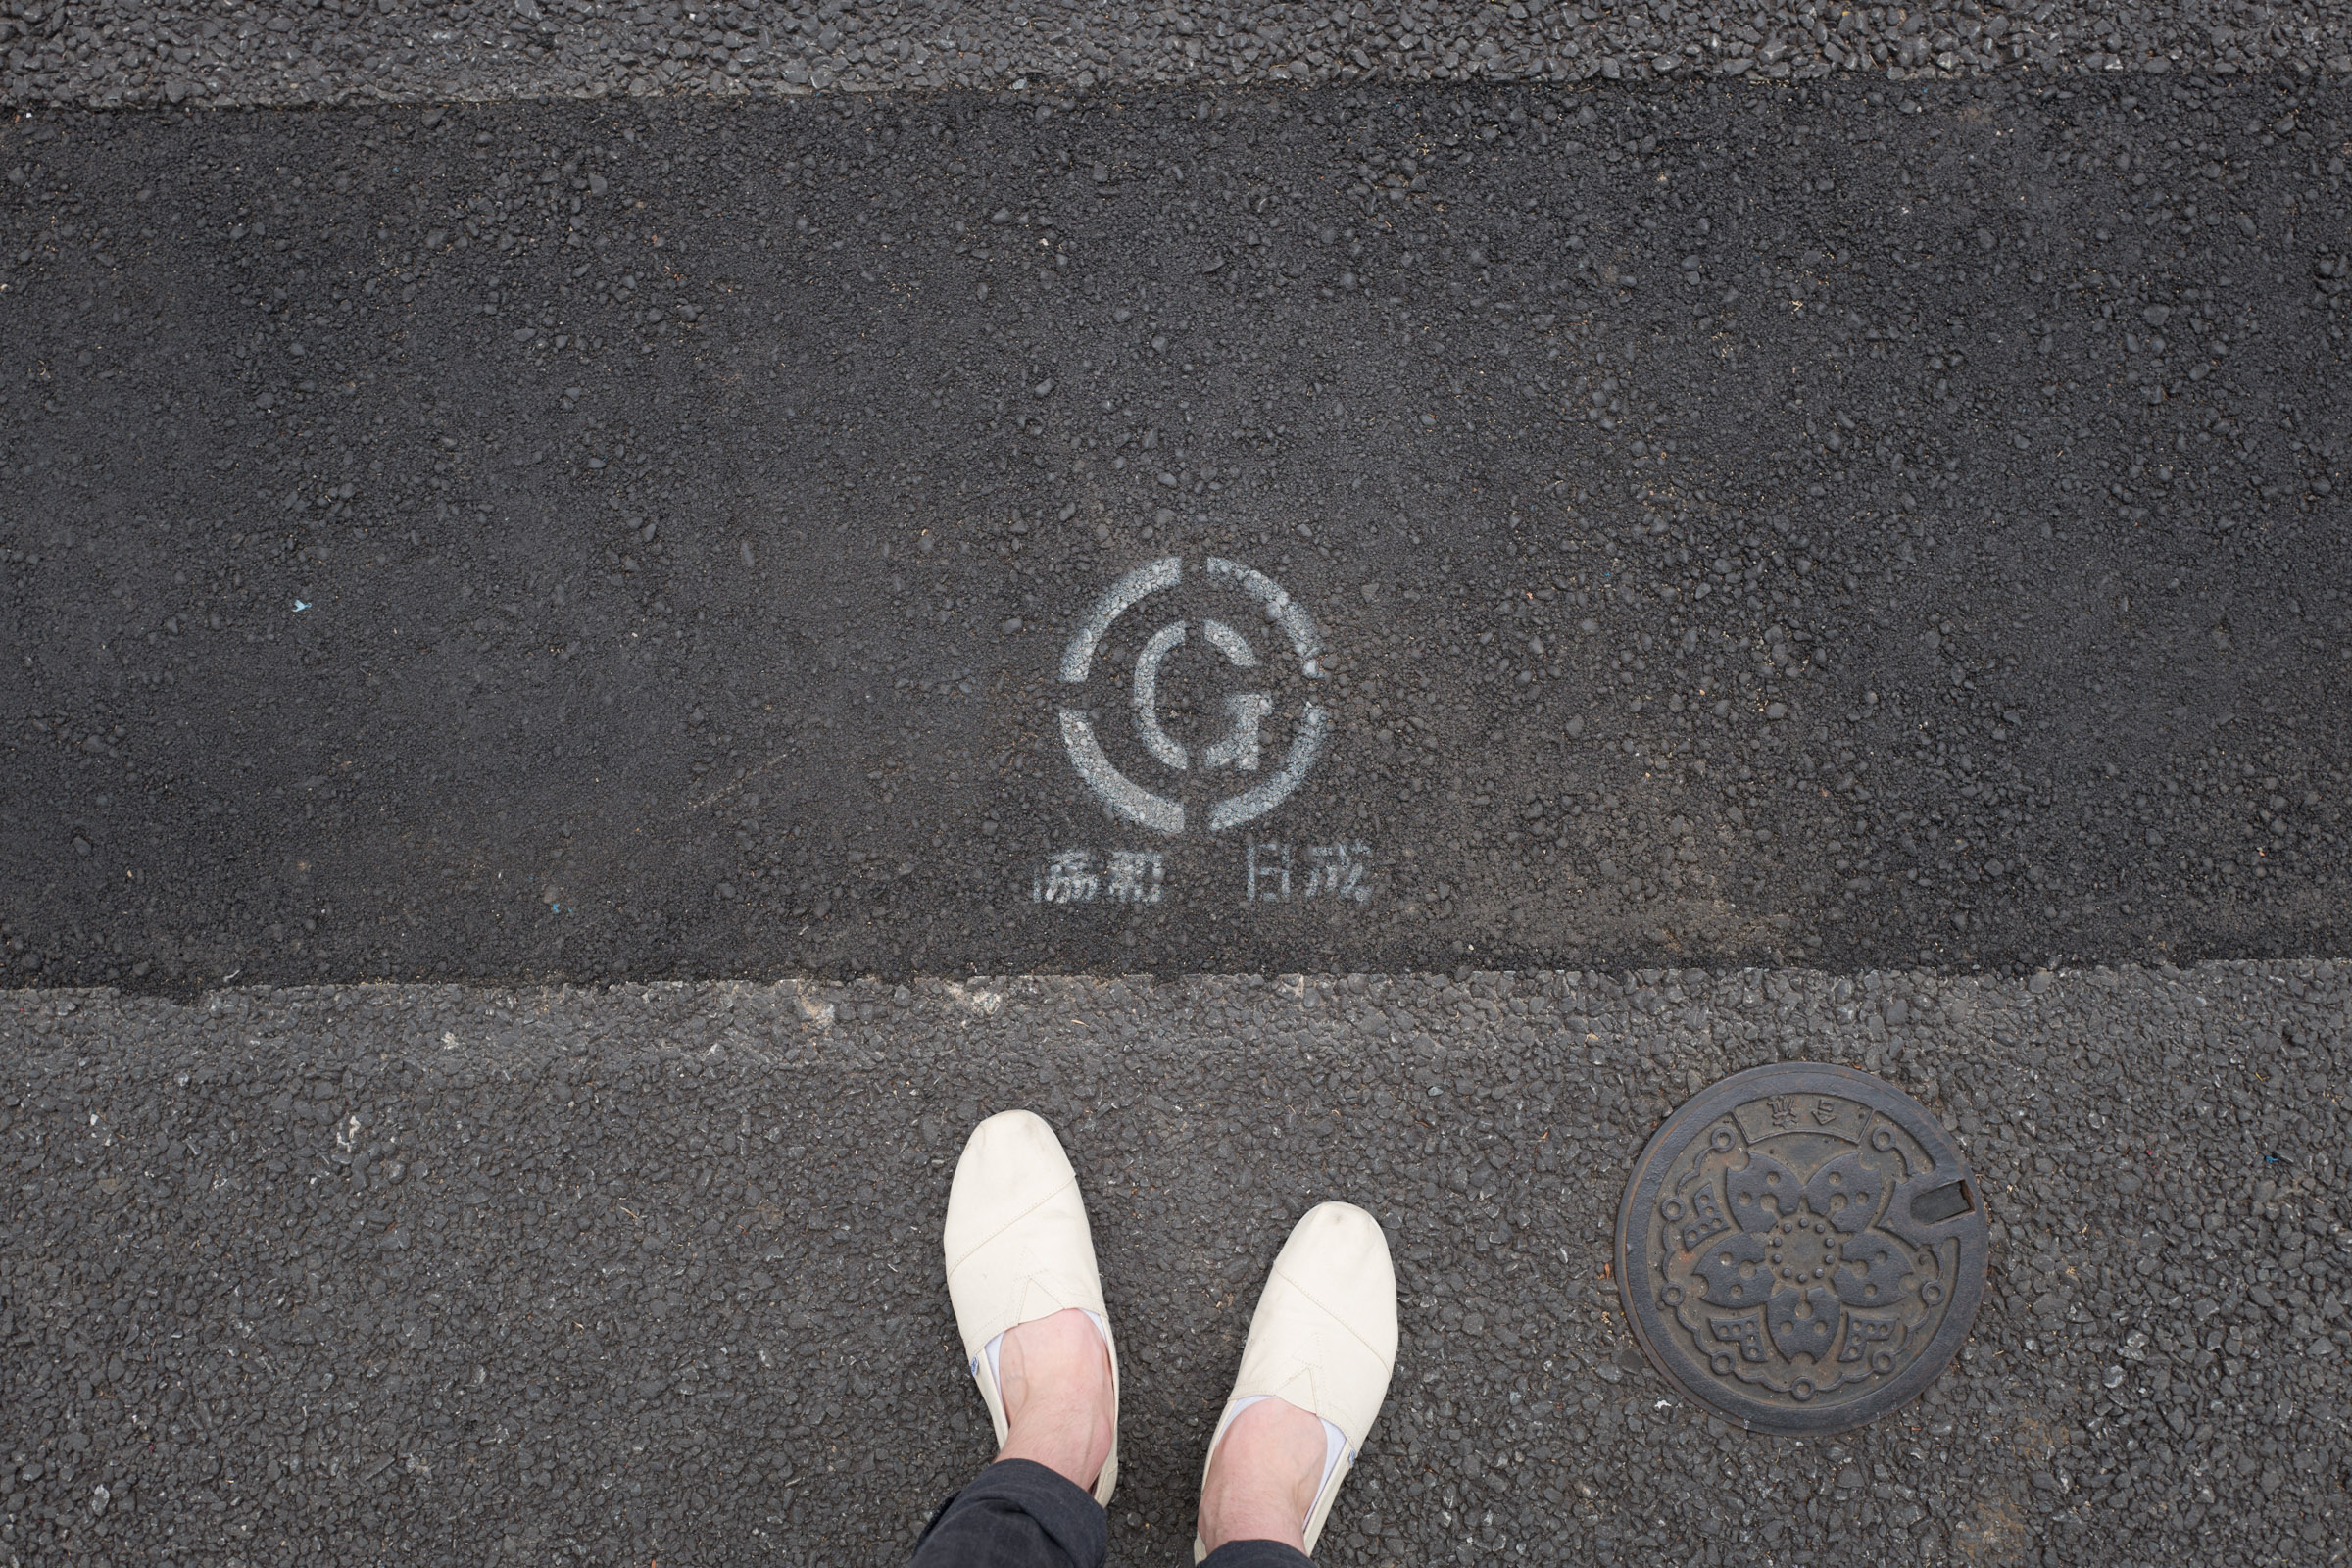 A “G” stenciled onto the streets of Tokyo